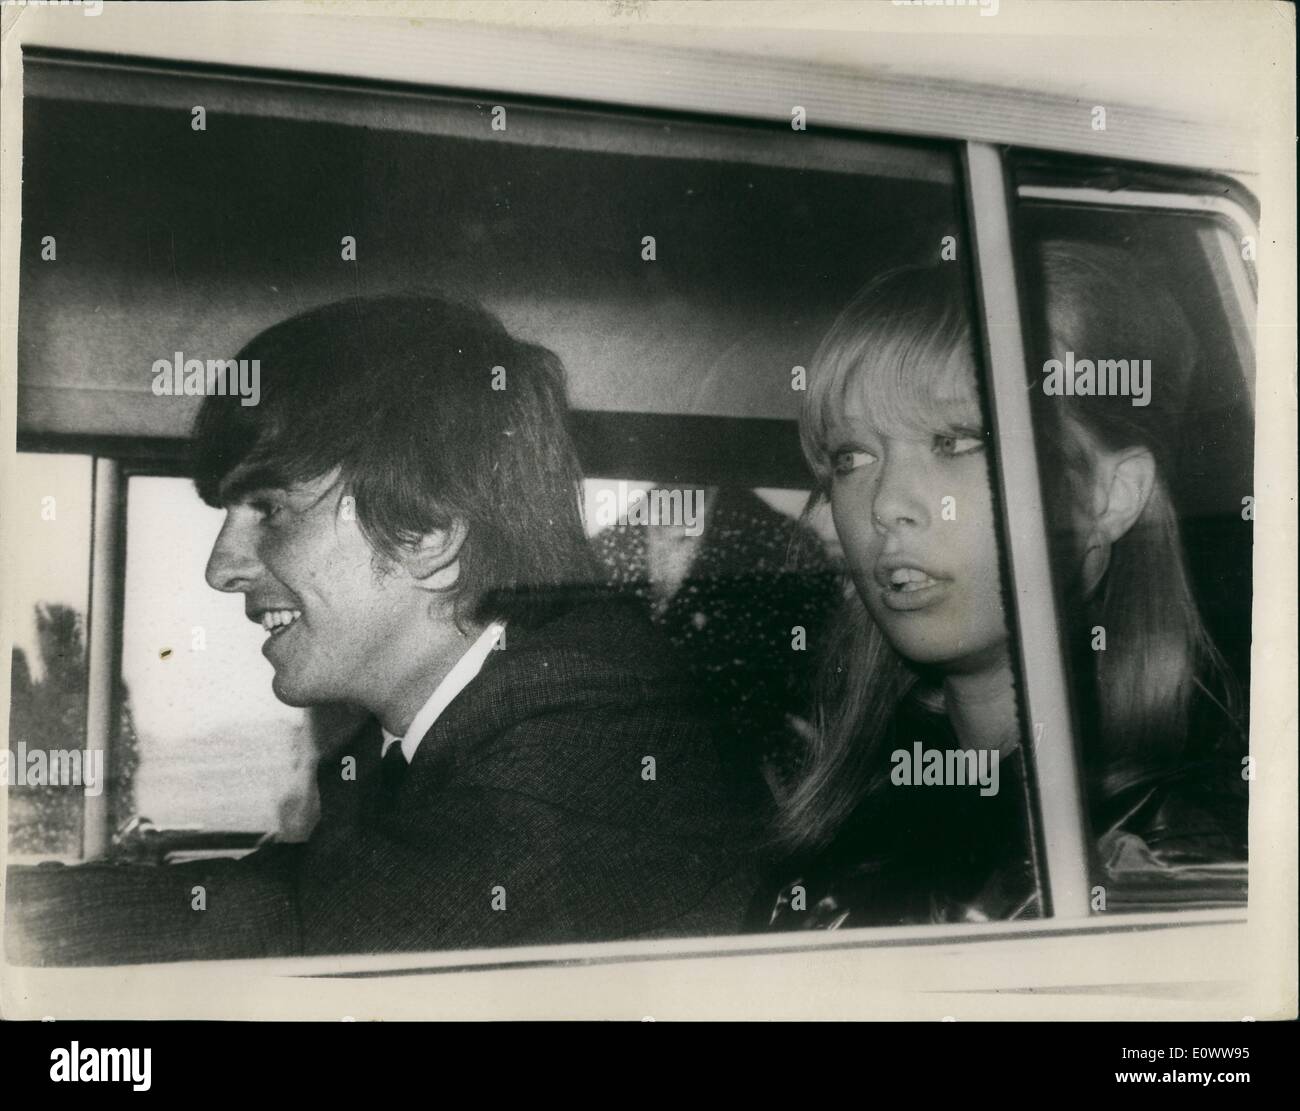 May 05, 1964 - Bealtes return from holiday: John Lennon and George Harrison of the Bealtes, arrived at London Airport last night after their month long holiday on an island in the South Seas. John was accompanied by his wife Cynthia, and George by his actress girl friend Patti Boyd. Next Thursday the whole group fly to Copenhagen to begin a tour which will take them through Hong Kong to Australia. Photo shows George Harrison and Patti Boyd on their return yesterday. Stock Photo